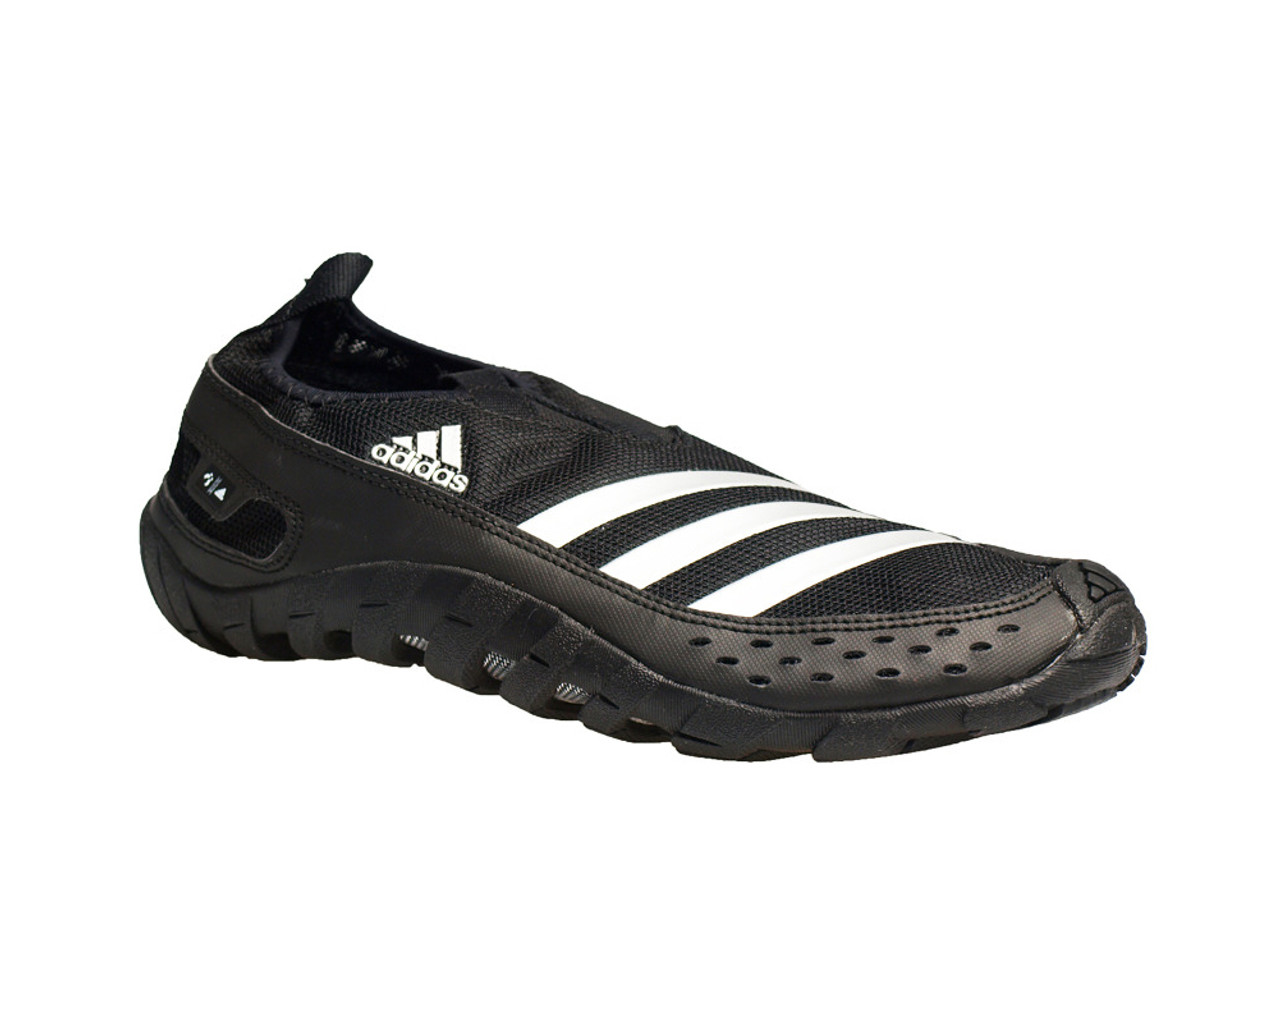 Adidas Men's Jawpaw II Water Shoes - Black | Discount Adidas Men's Athletic  Shoes & More  